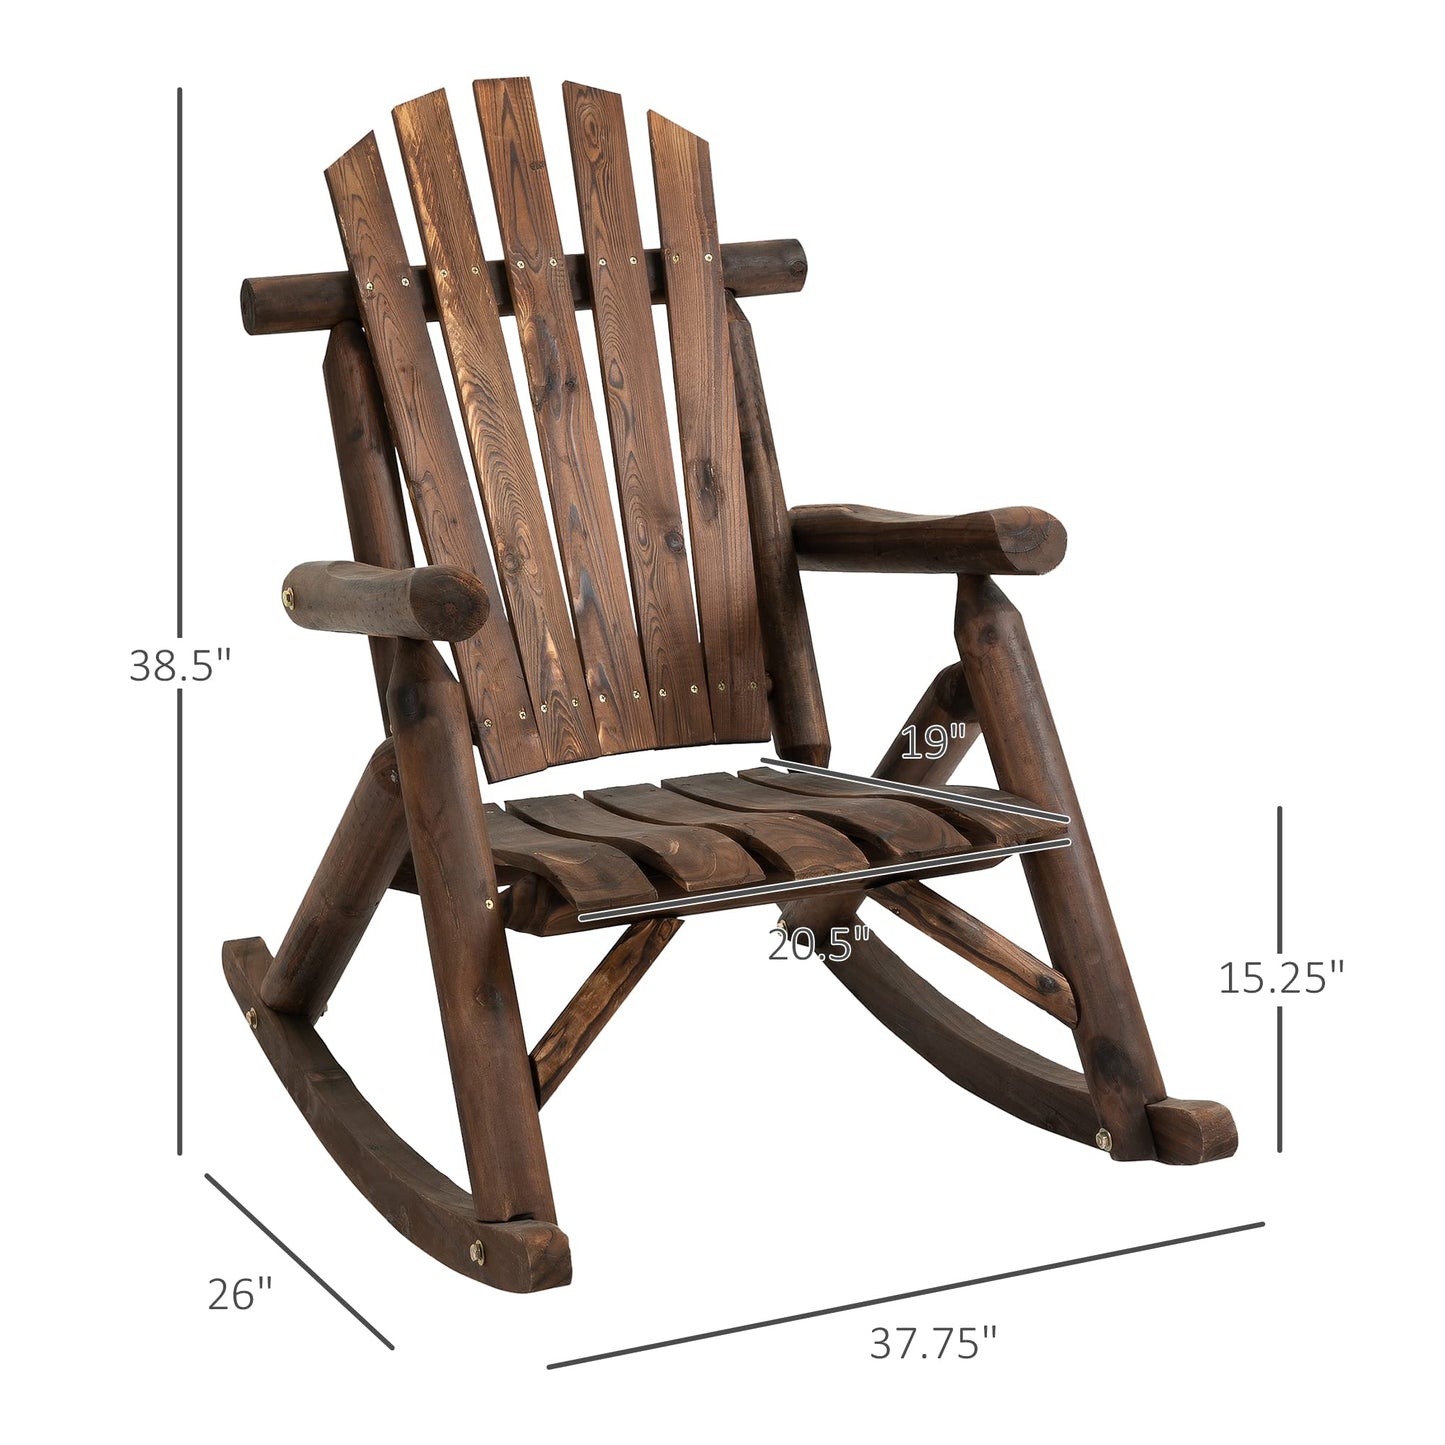 Outsunny Outdoor Wooden Rocking Chair, Single-Person Adirondack Rocking Patio Chair with Rustic High Back, Slatted Seat and Backrest for Indoor, Backyard, Garden, Carbonized